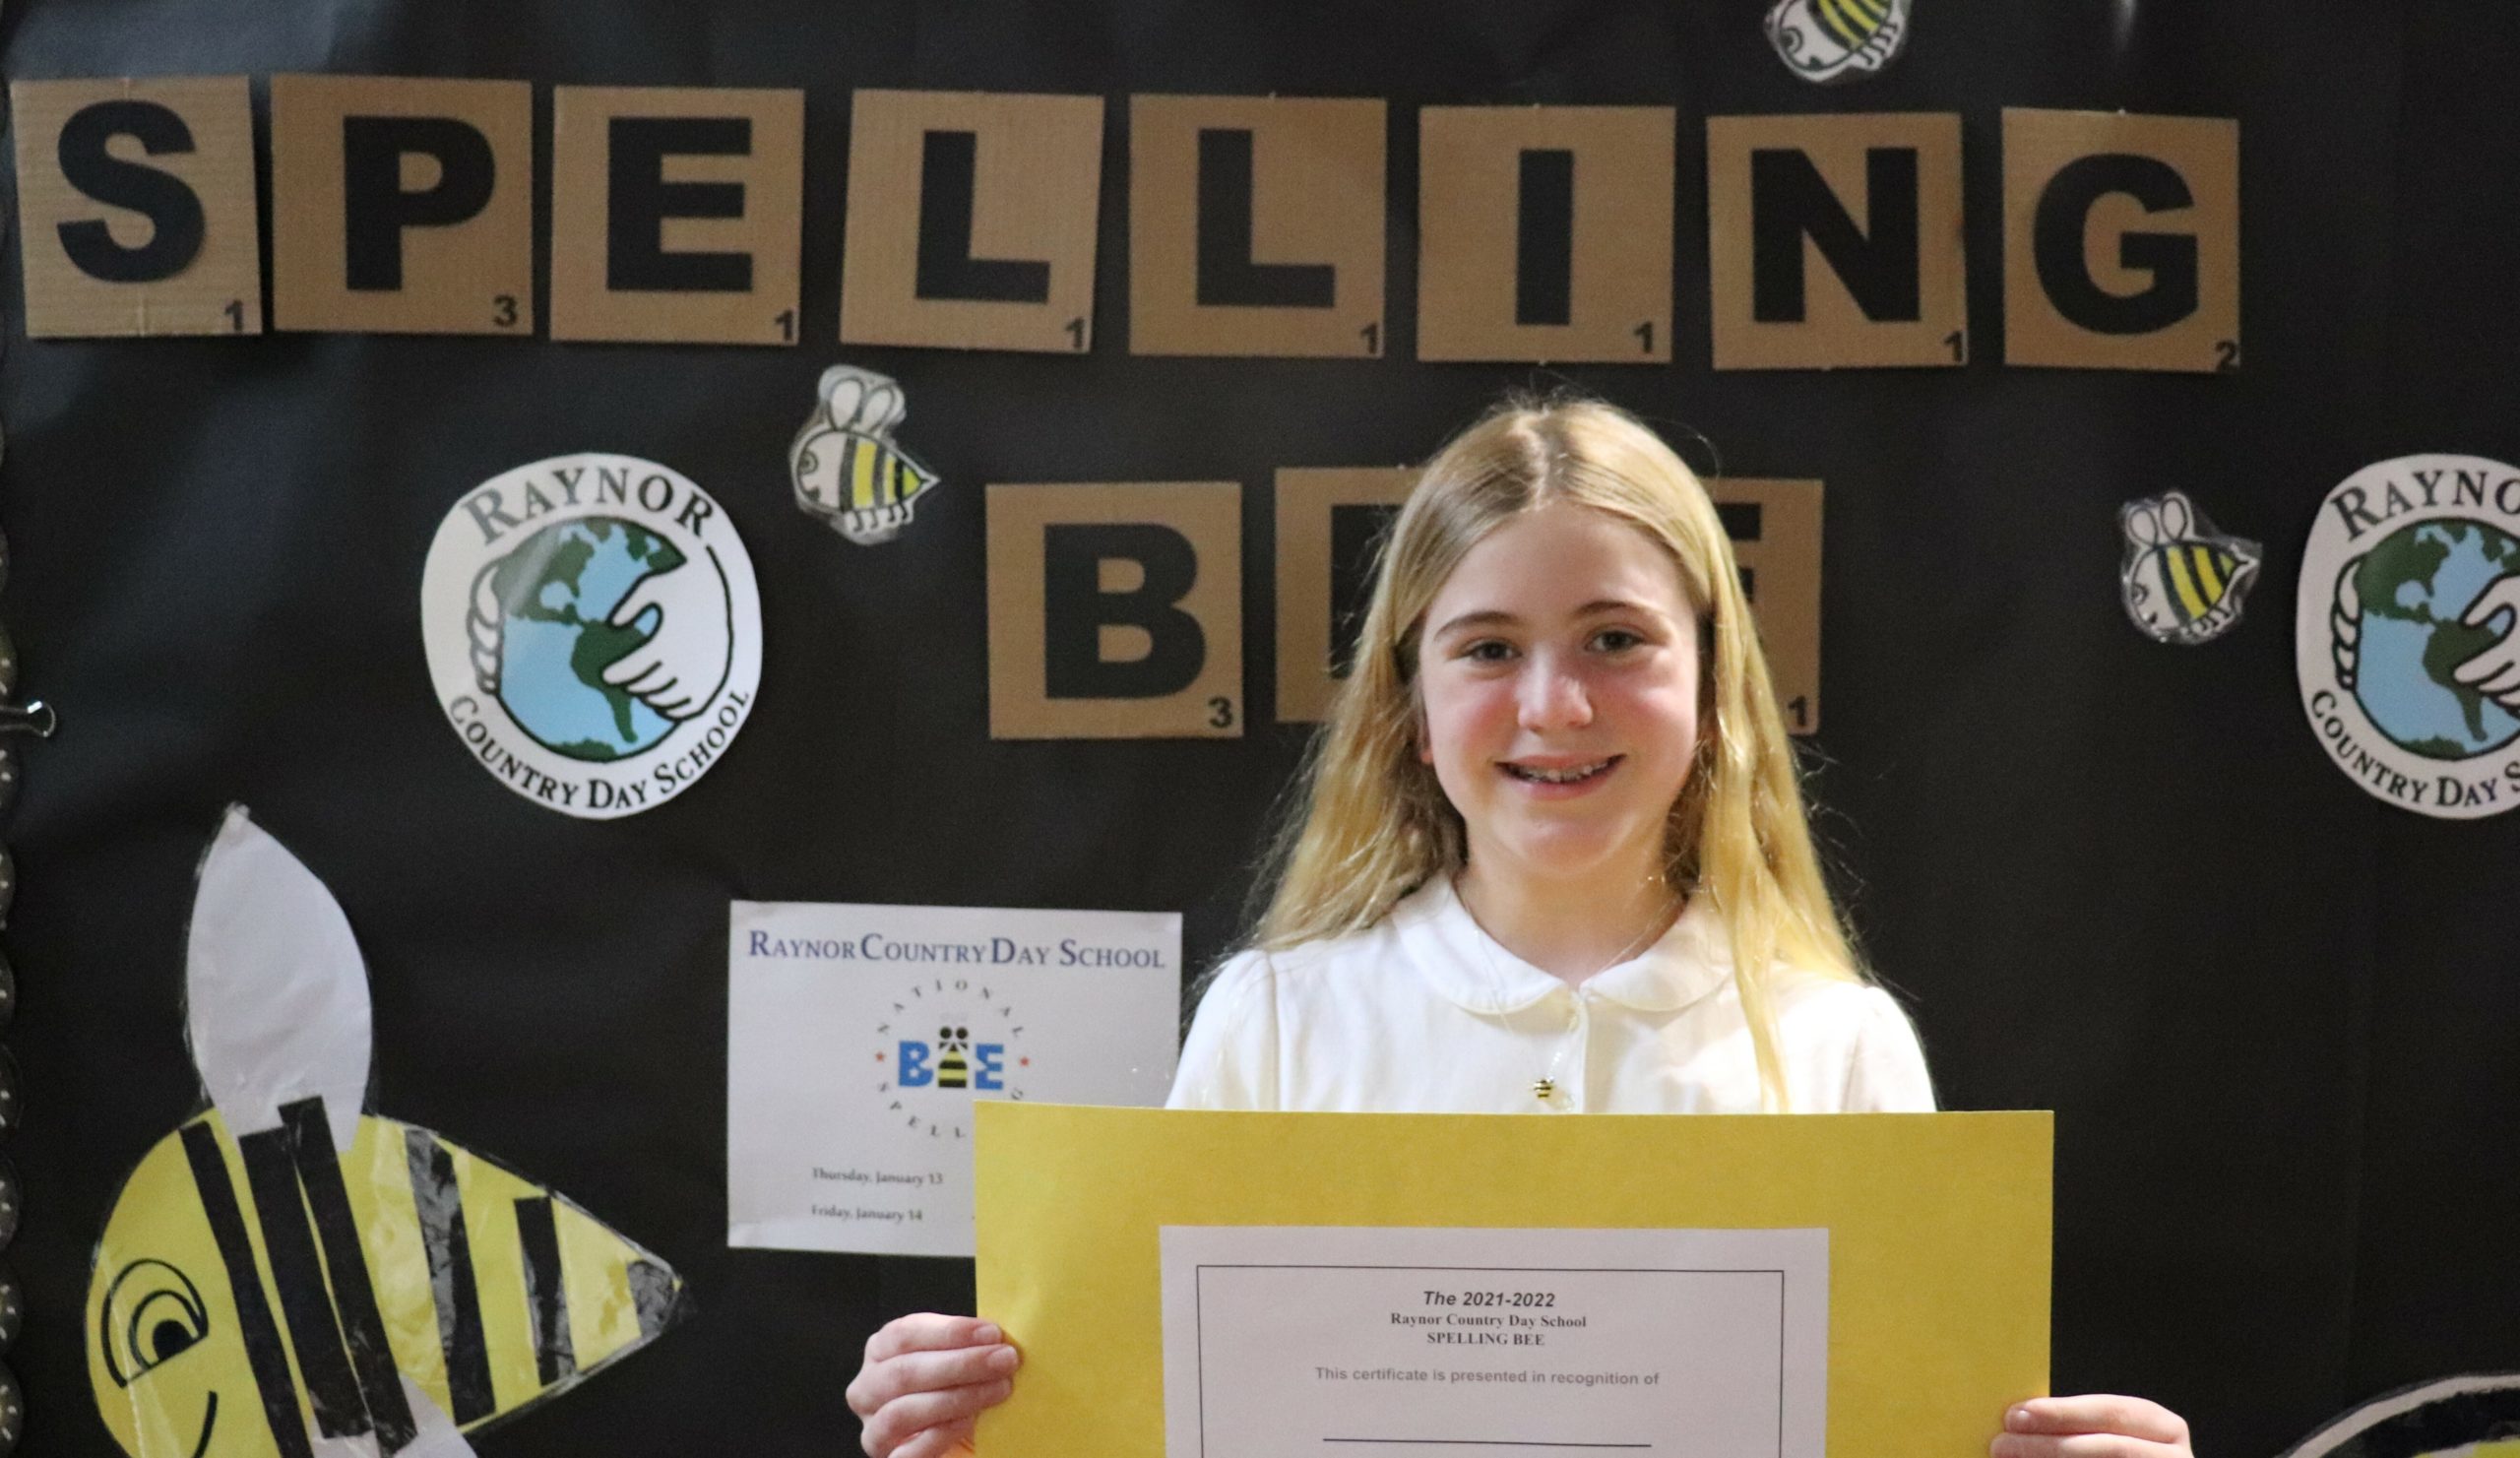 Sixth-grader  Rebecca Bartha is the 2022 Spelling Bee Champion at the Raynor Country Day School's Scripp's National Spelling Bee on Friday, January 14.  Rebecca will go on to represent the school at the regional level.